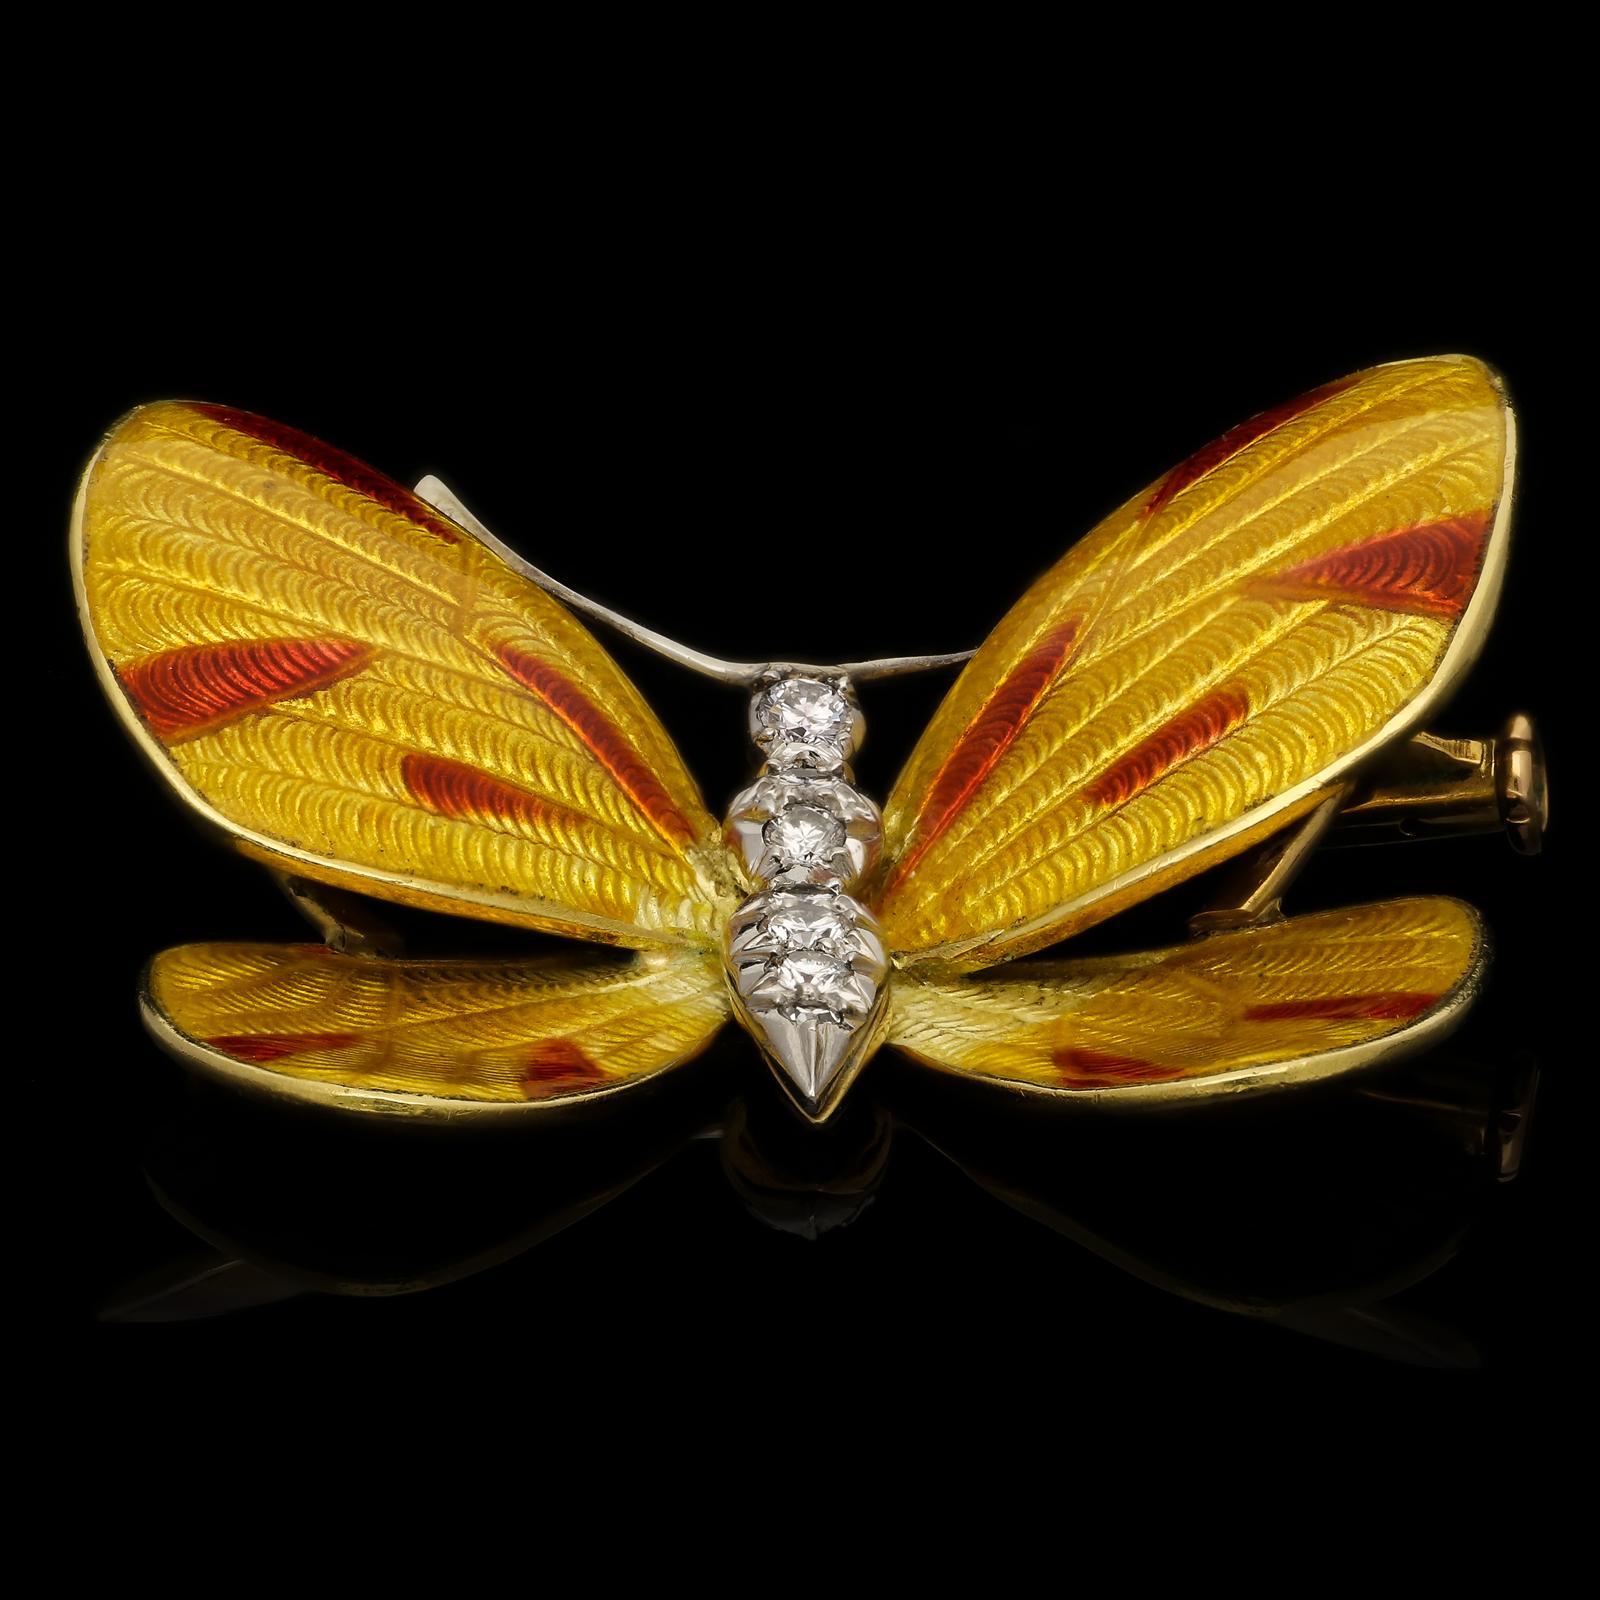 Description
A beautiful vintage enamel and diamond butterfly brooch by Boucheron c.1960s, of three dimensional form in 18ct yellow gold, the wings decorated with yellow and red basse-taille enamel and the body set with seven round brilliant cut